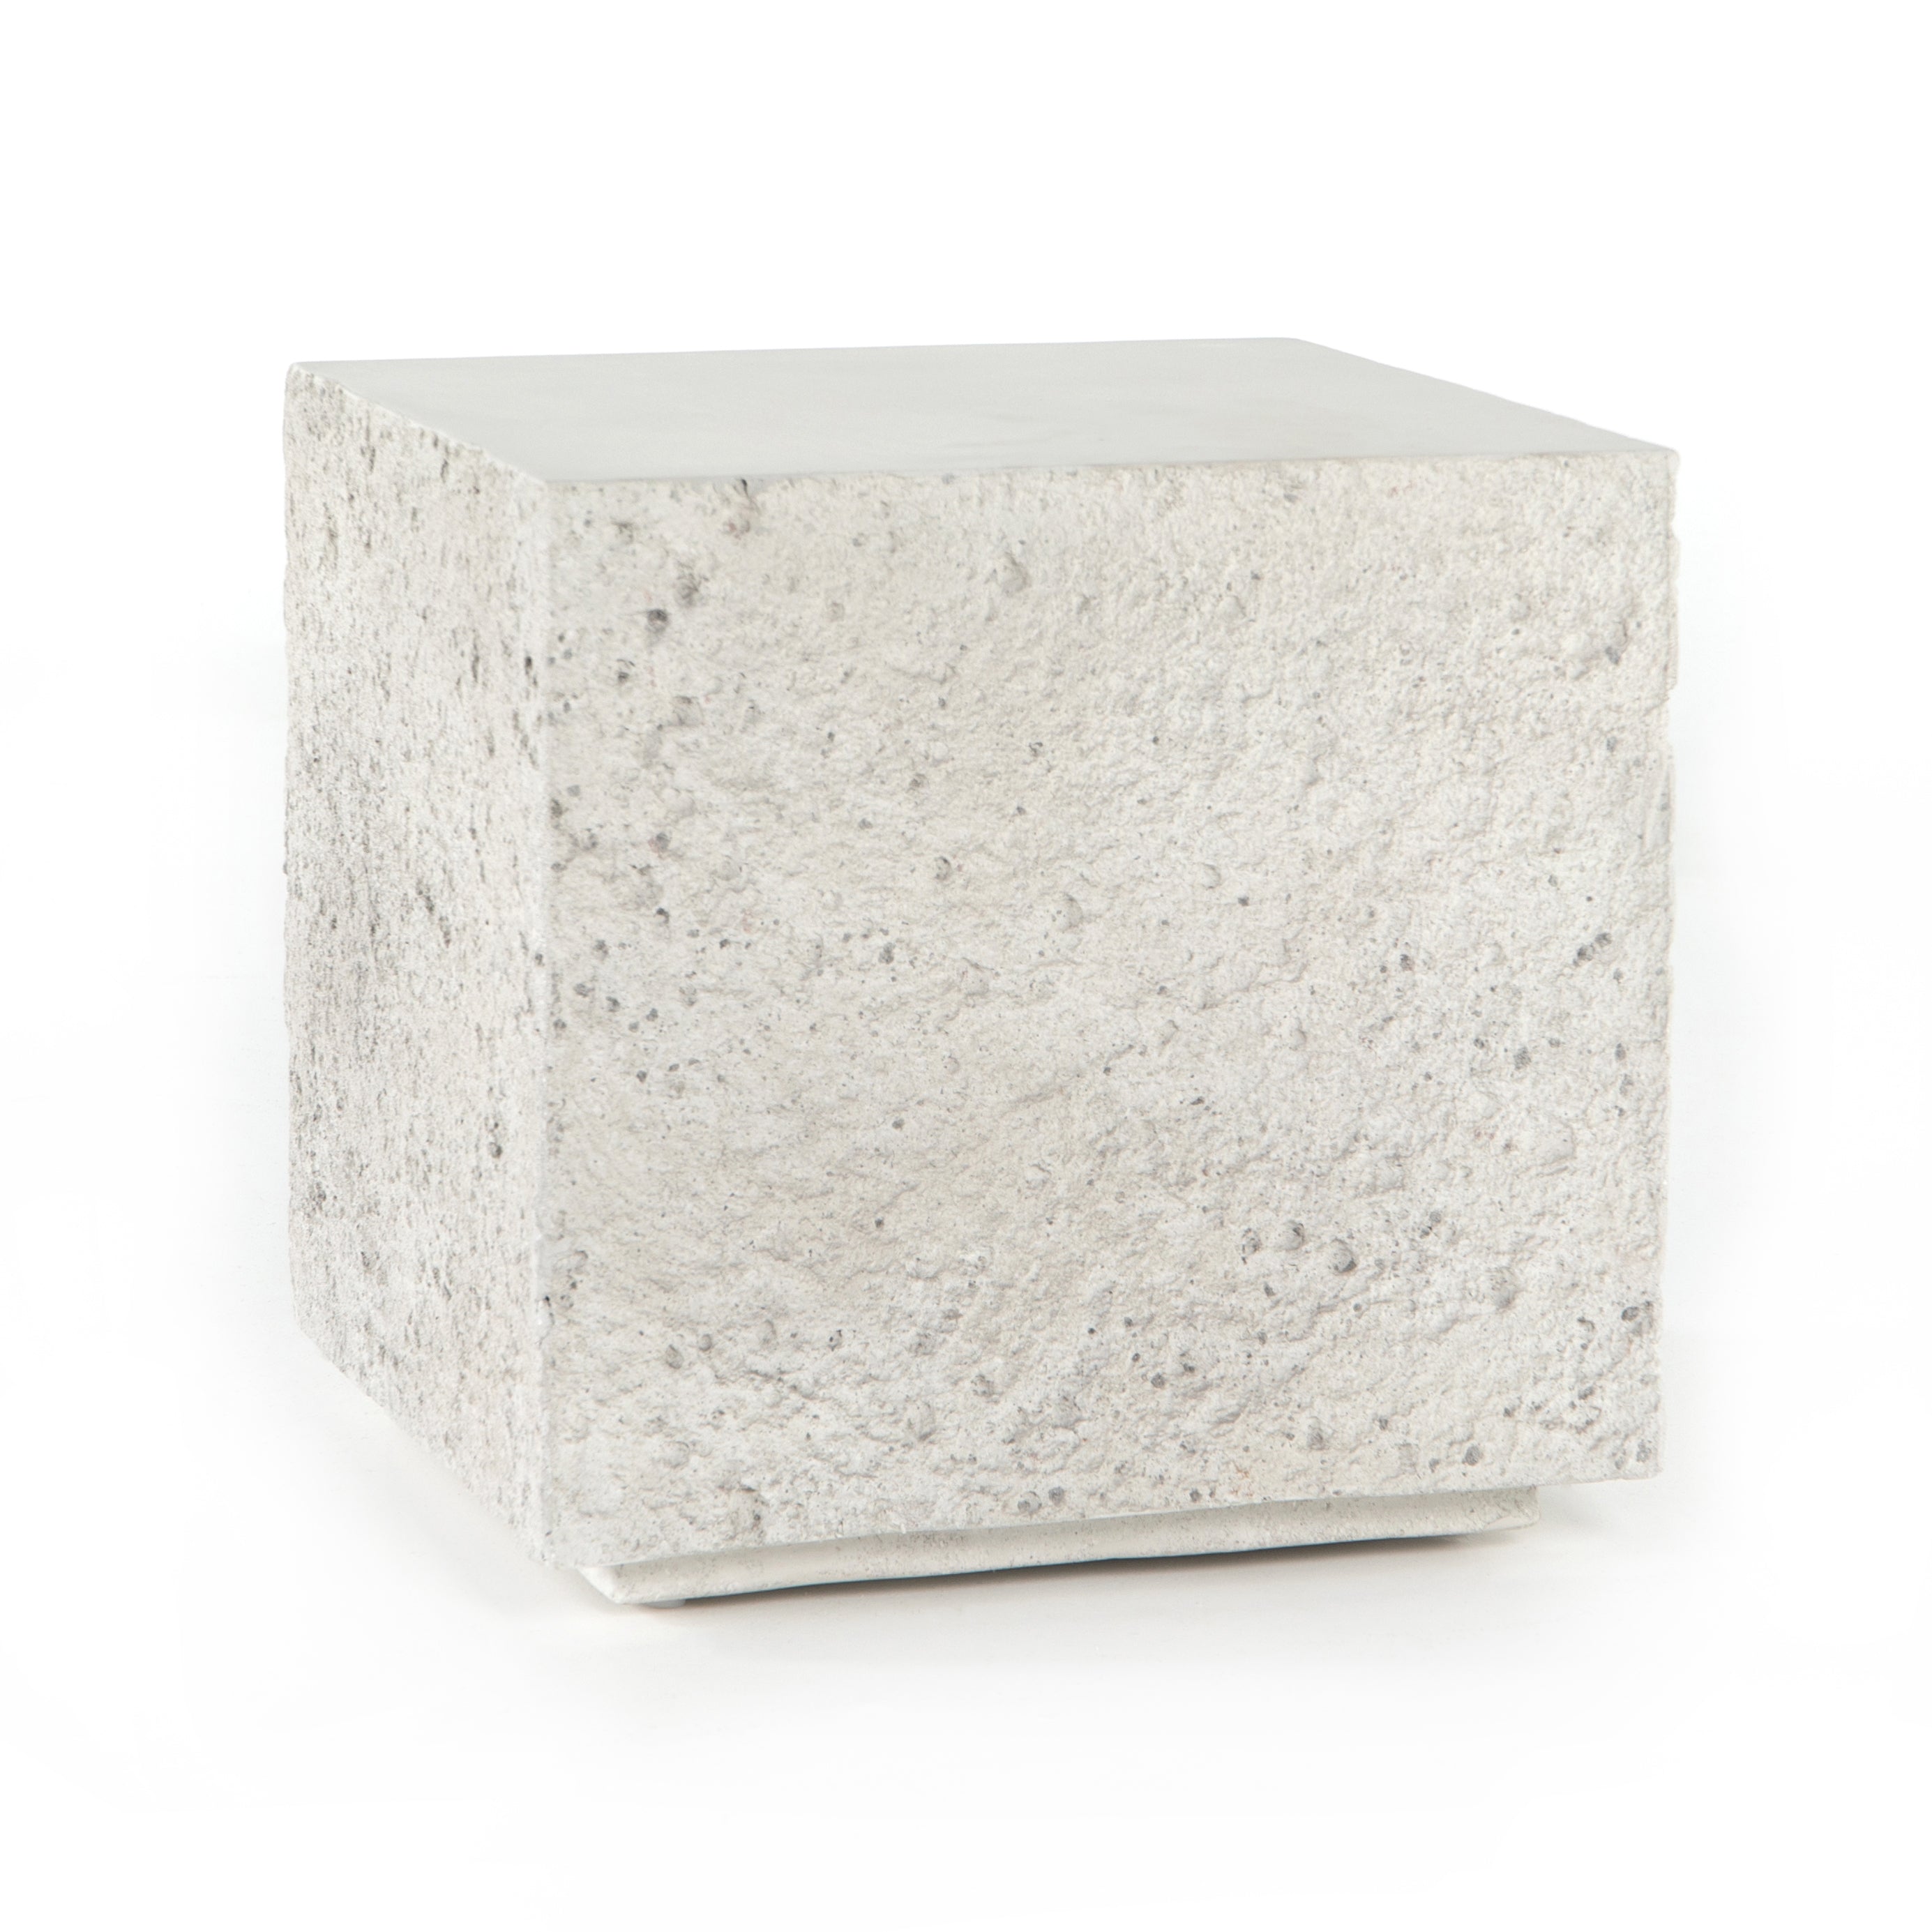 We love the textured, cubic look of this Otero Outdoor Square End Table. We'd love to see this featured on your patio or pool side! Cover or store indoors during inclement weather and when not in use.  Overall Dimensions: 17.75"w x 17.75"d x 18.25"h